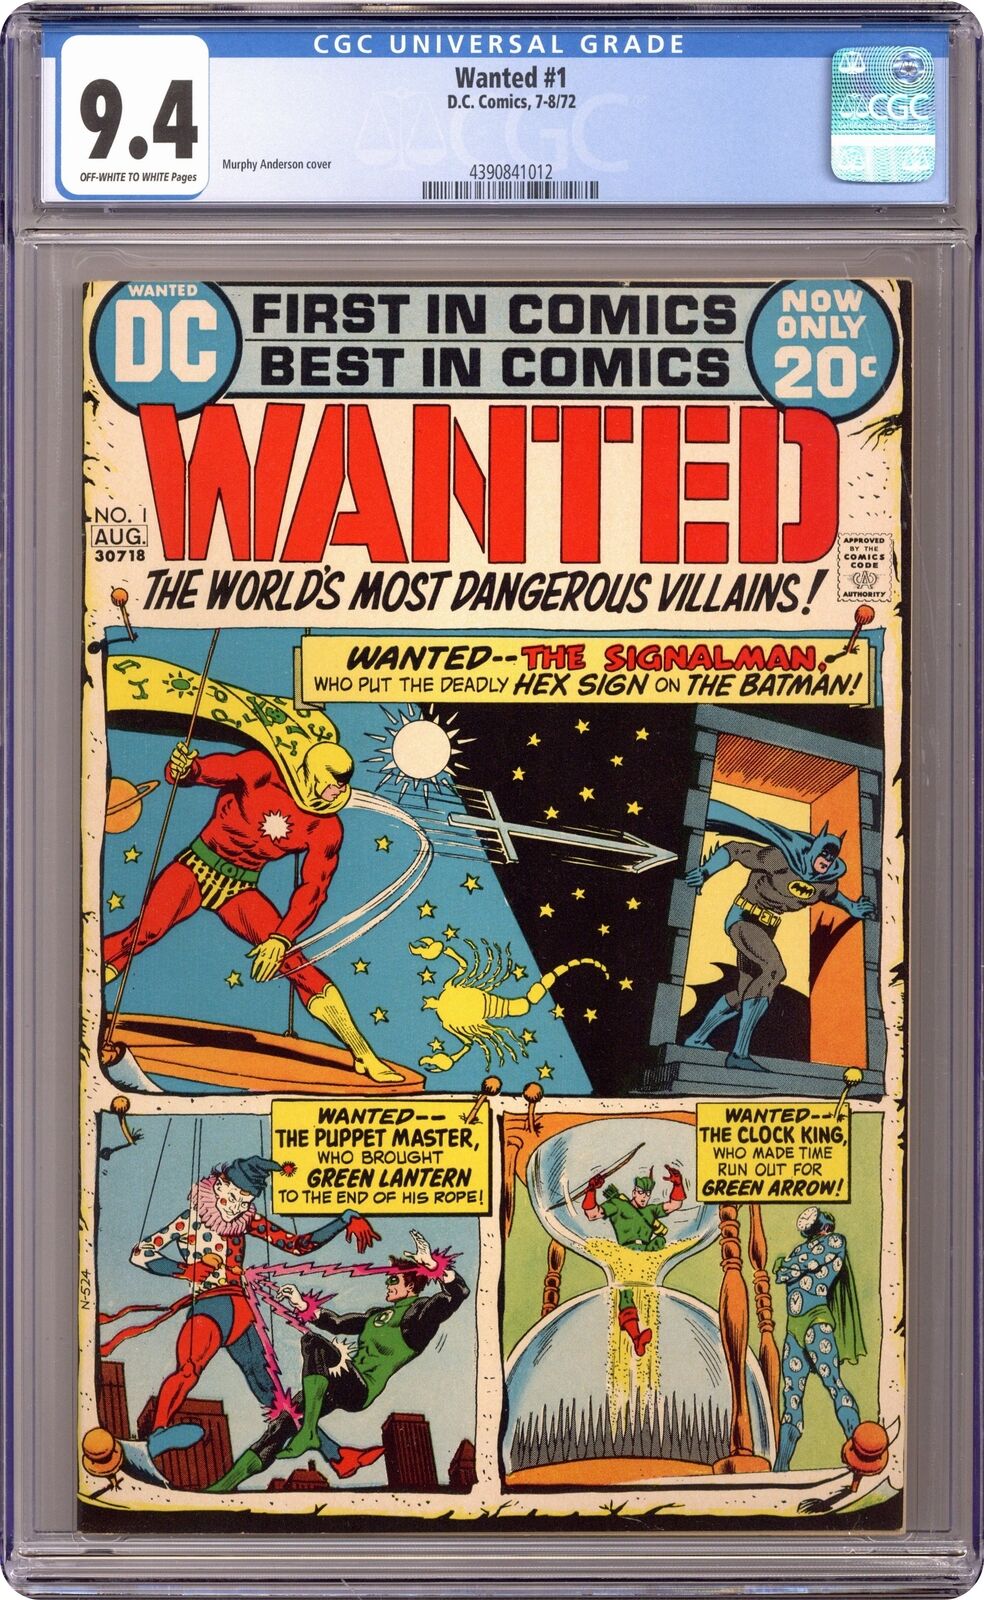 Wanted the World's Most Dangerous Villains #1 CGC 9.4 1972 4390841012